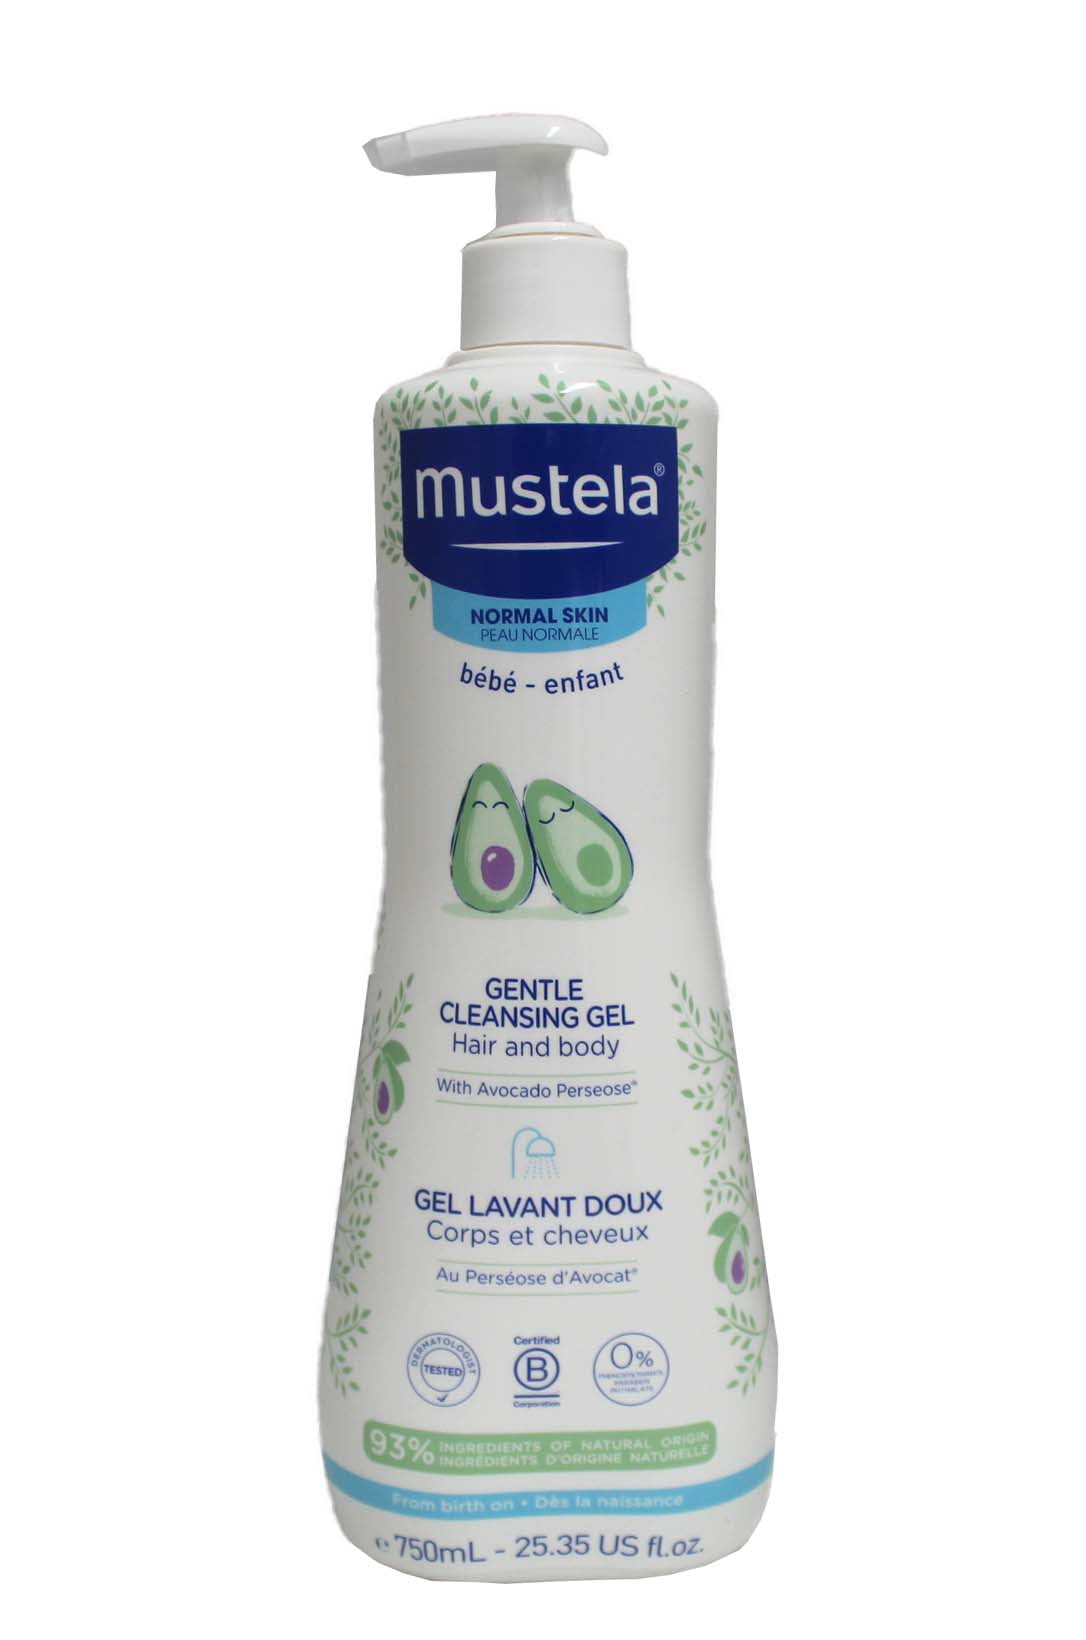 Mustela Baby Gentle Cleansing Gel, Hair and Body Wash with Natural